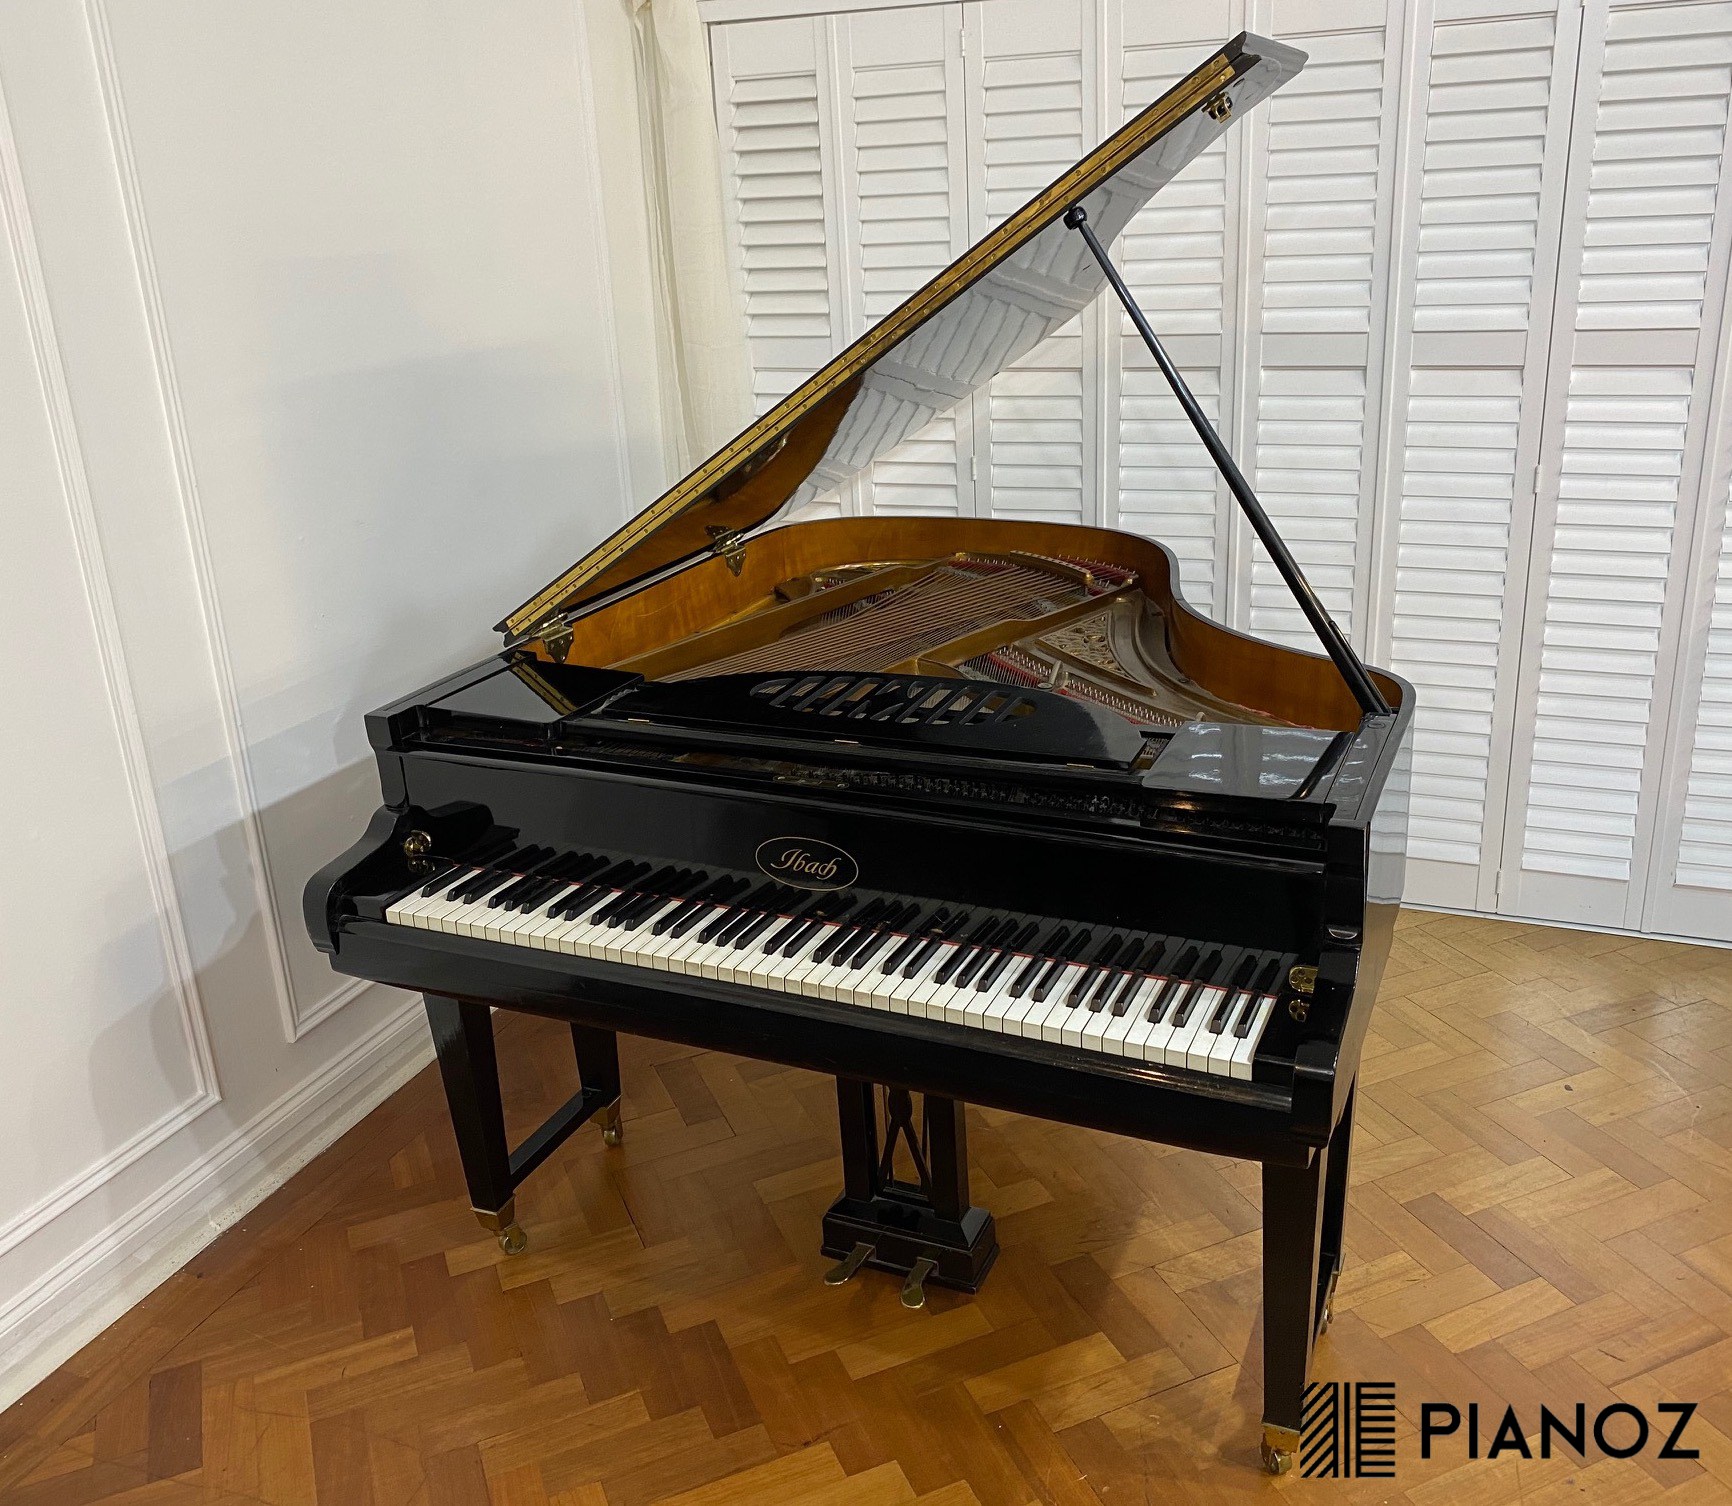 Ibach Black Gloss Baby Grand Piano piano for sale in UK